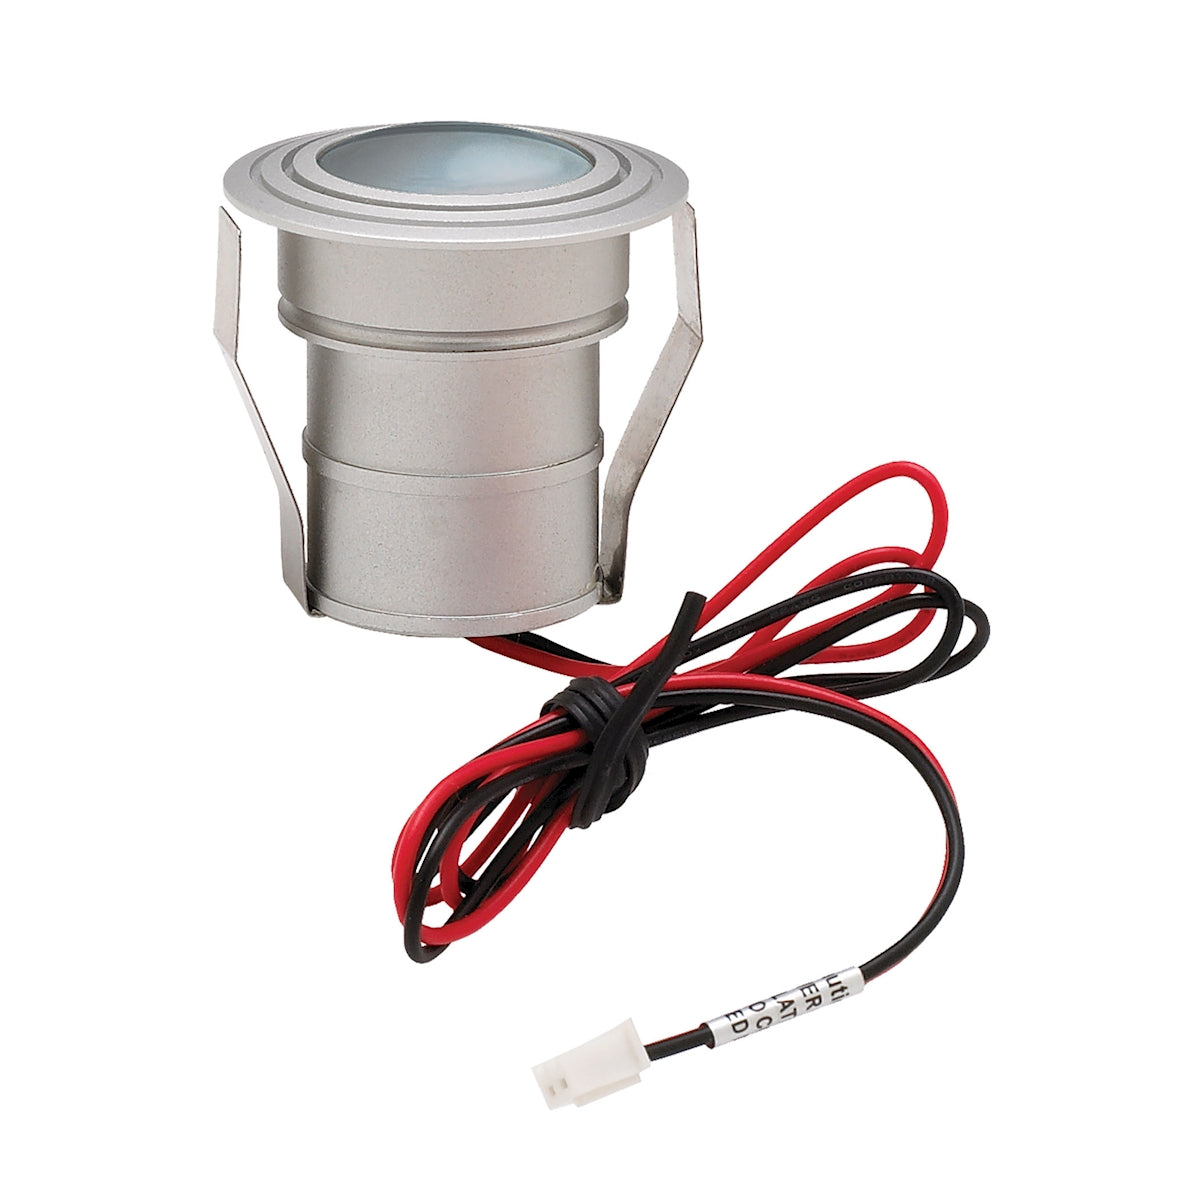 ELK Lighting WLE122C32K-0-95 Batwing 1-Light Button Light in Matte Aluminum with Frosted Lens - Integrated LED